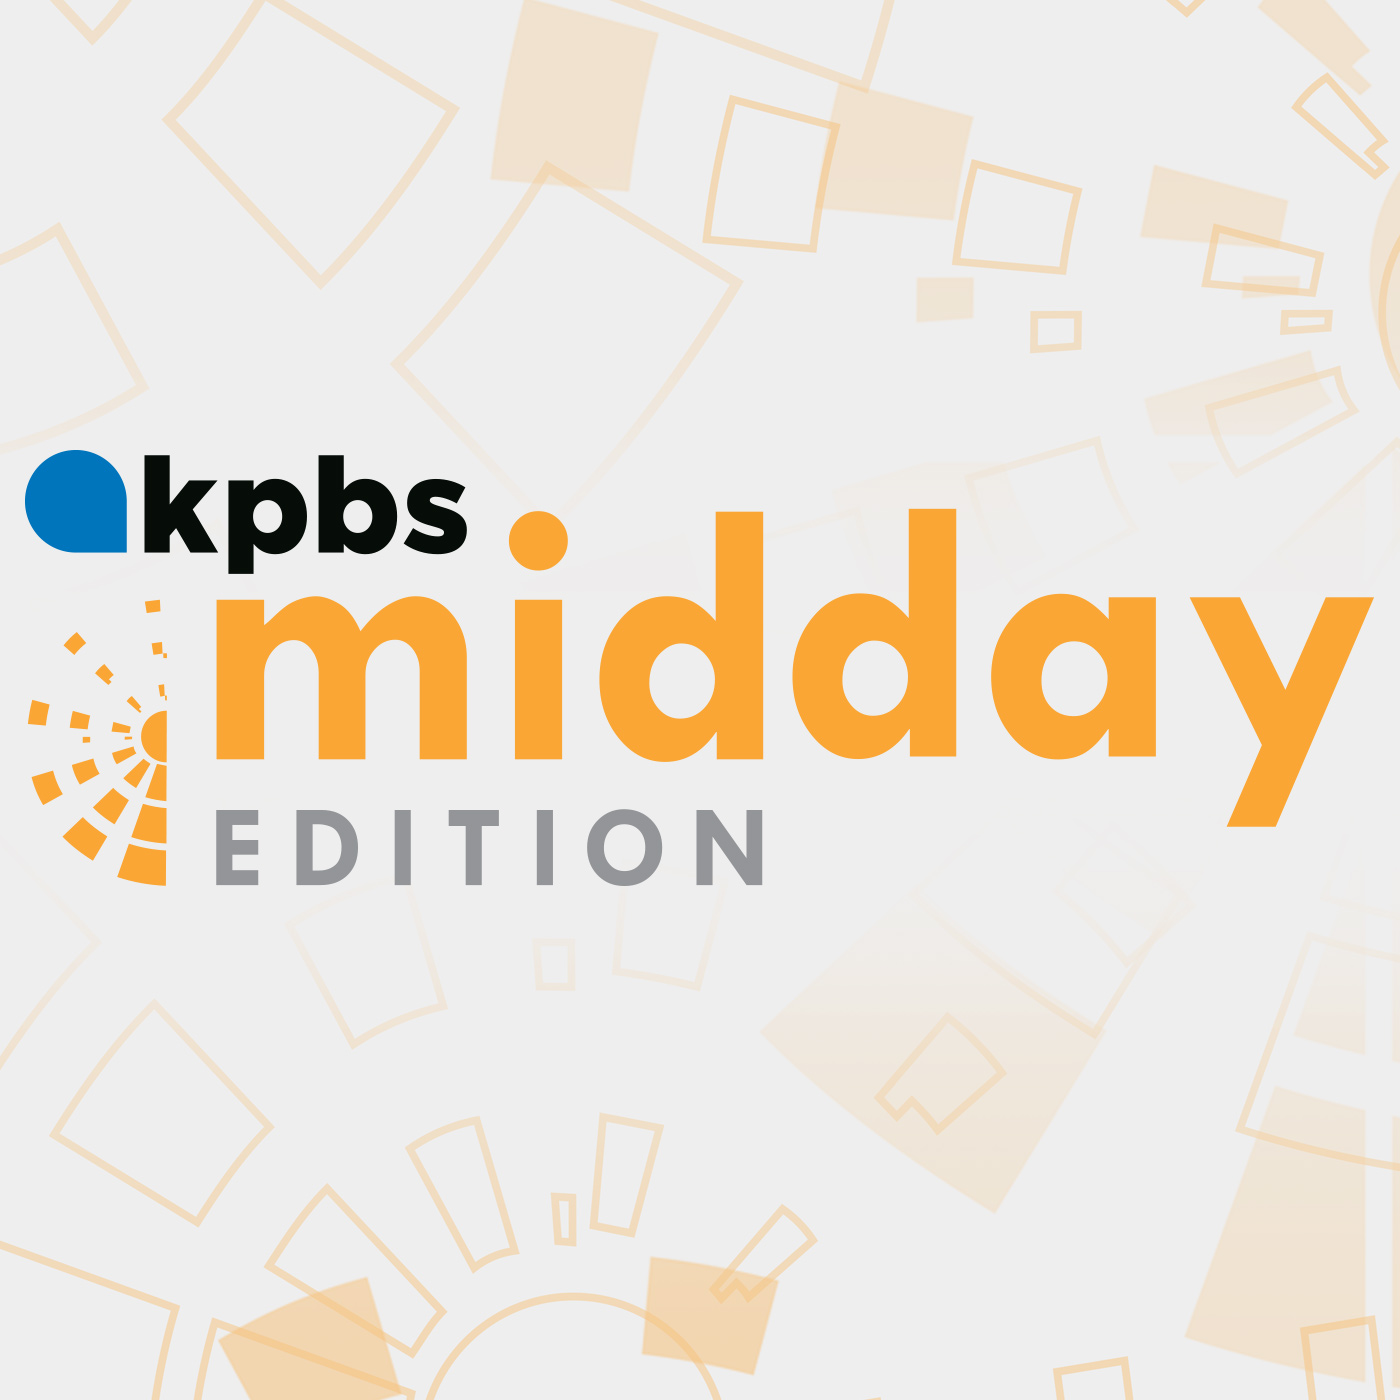 Podcast brand for KPBS segments Midday Edition